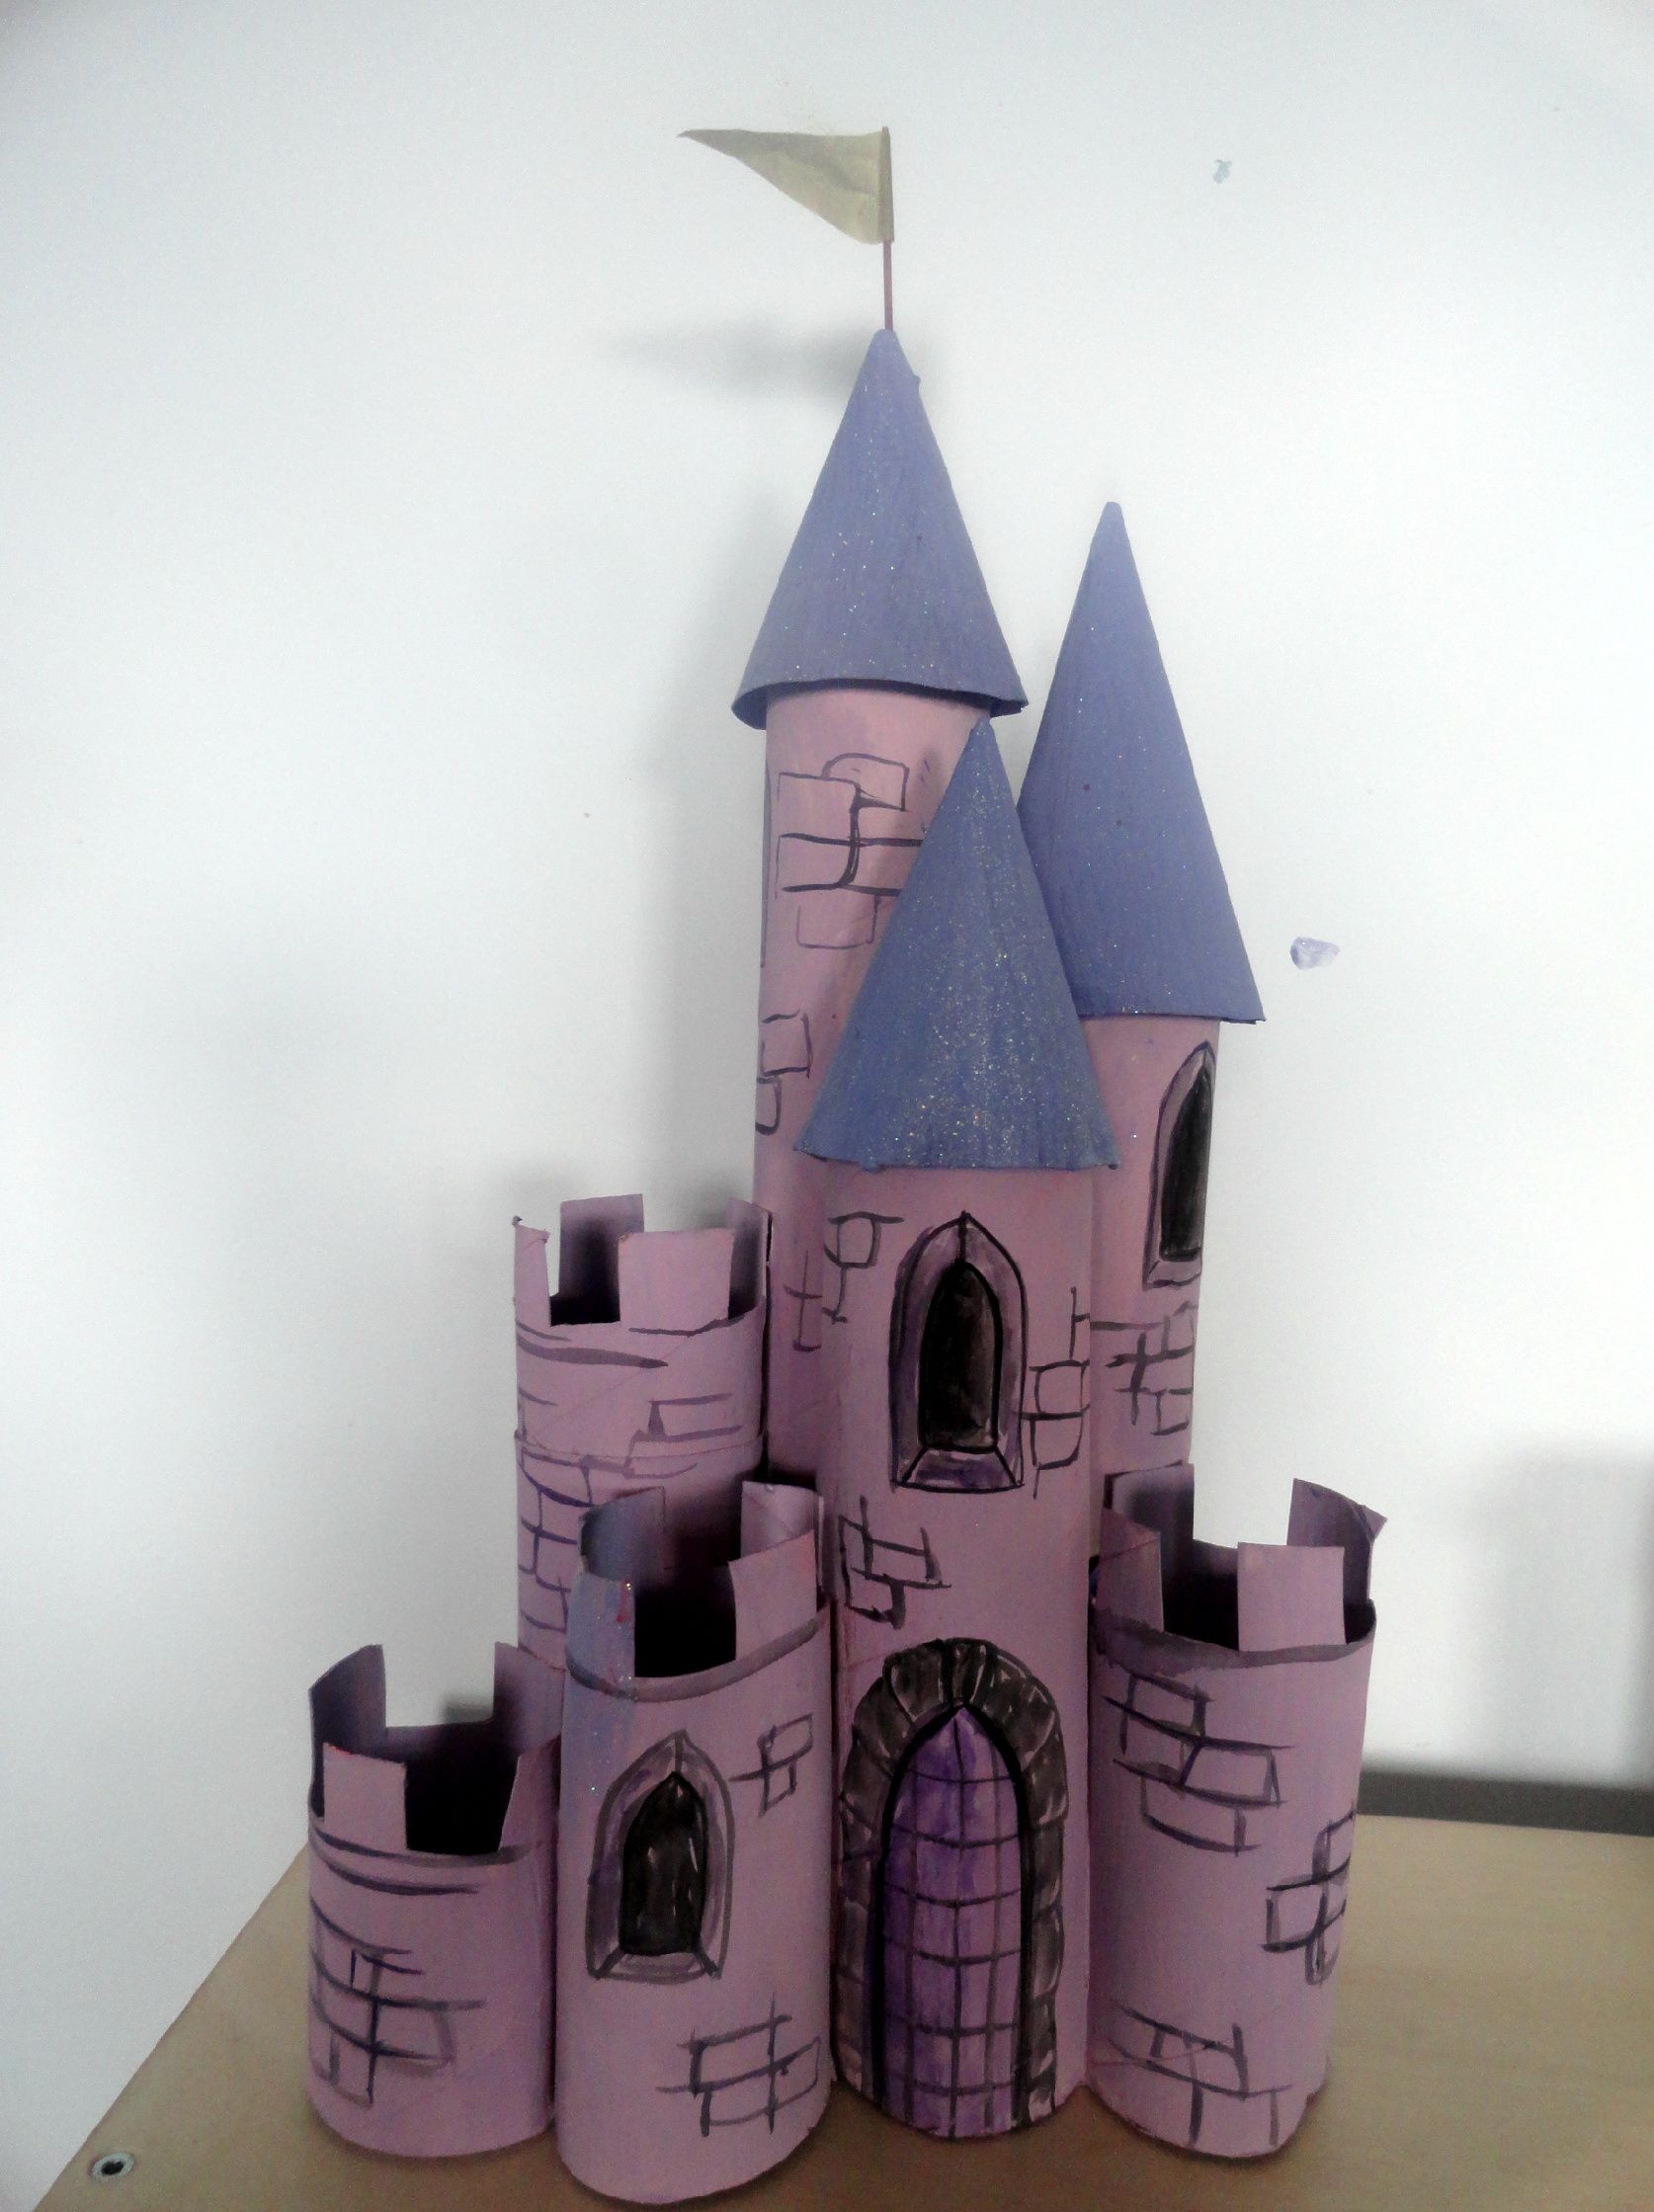 Papercraft Castle the World S top 10 Best Things to Do with Empty toilet Rolls